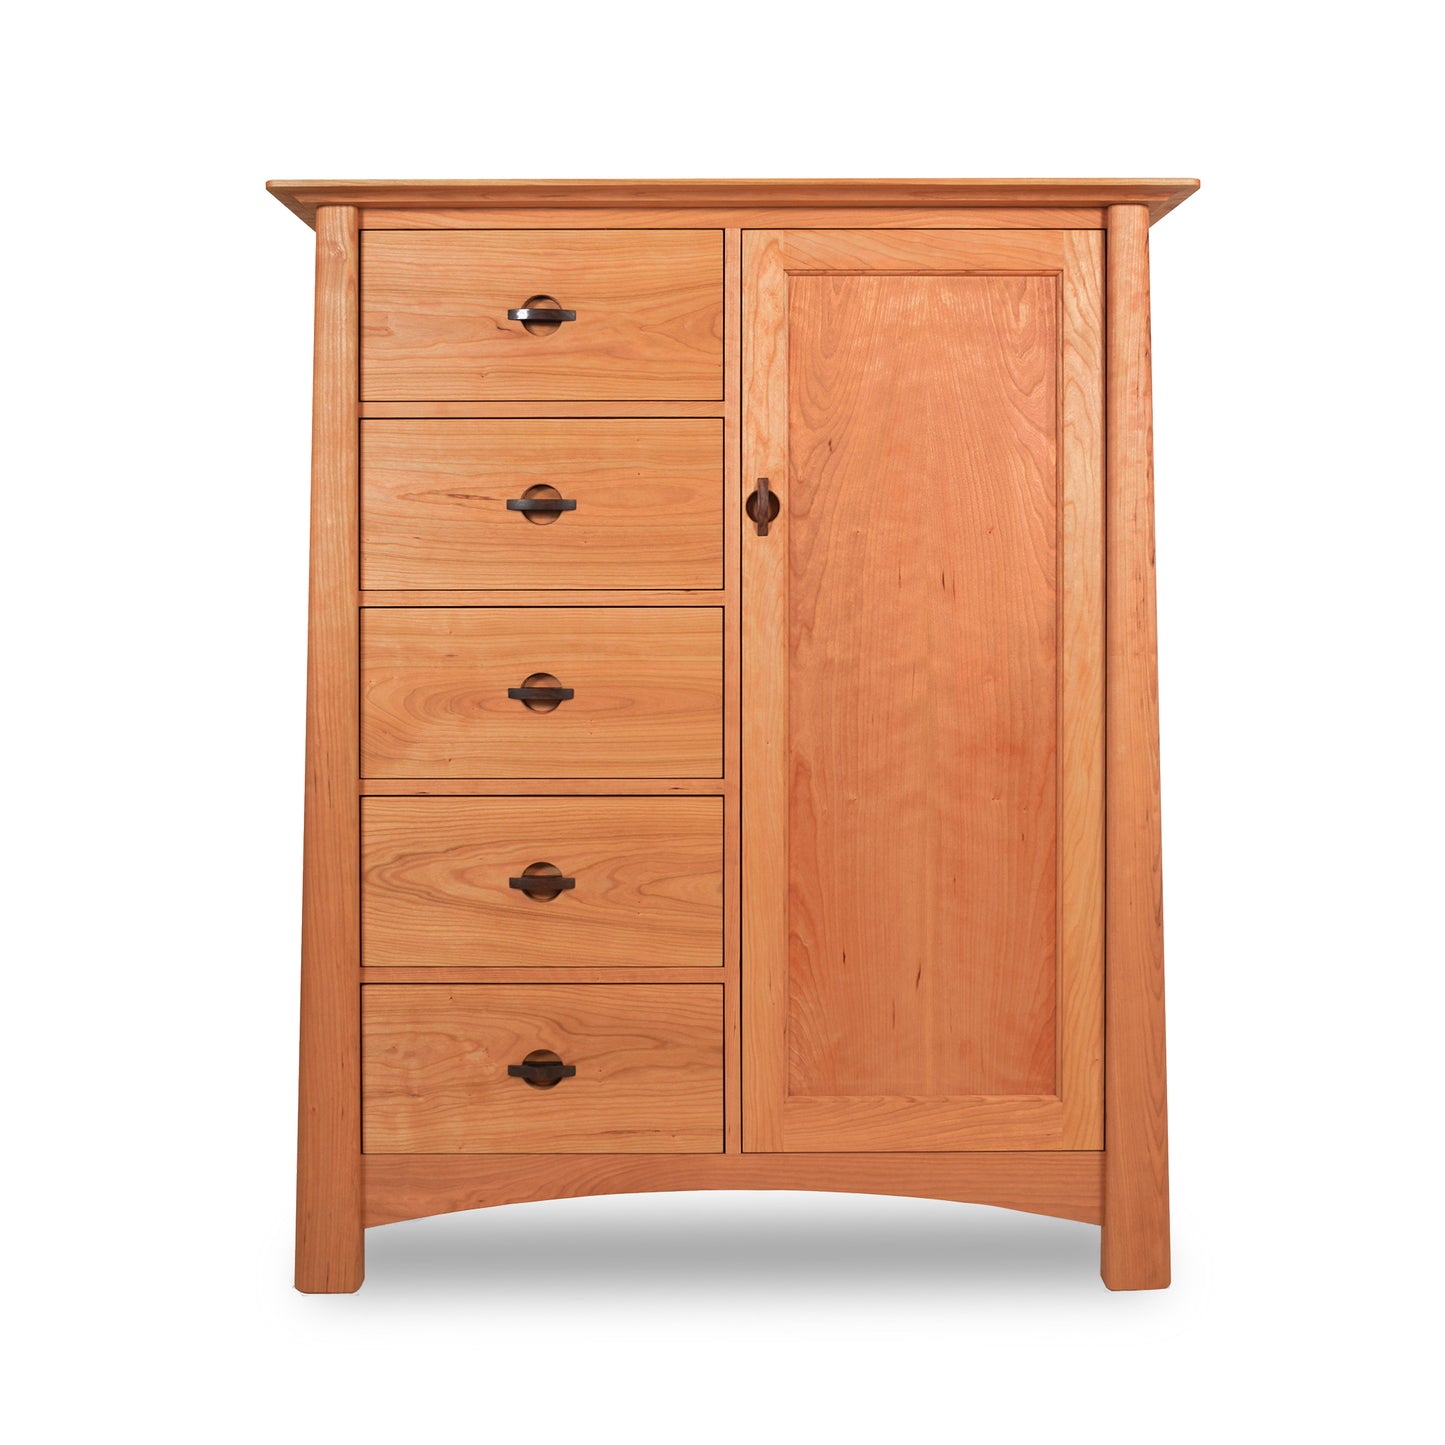 An eco-friendly Cherry Moon Sweater Chest with two drawers and two doors featuring Walnut pulls, by Maple Corner Woodworks.